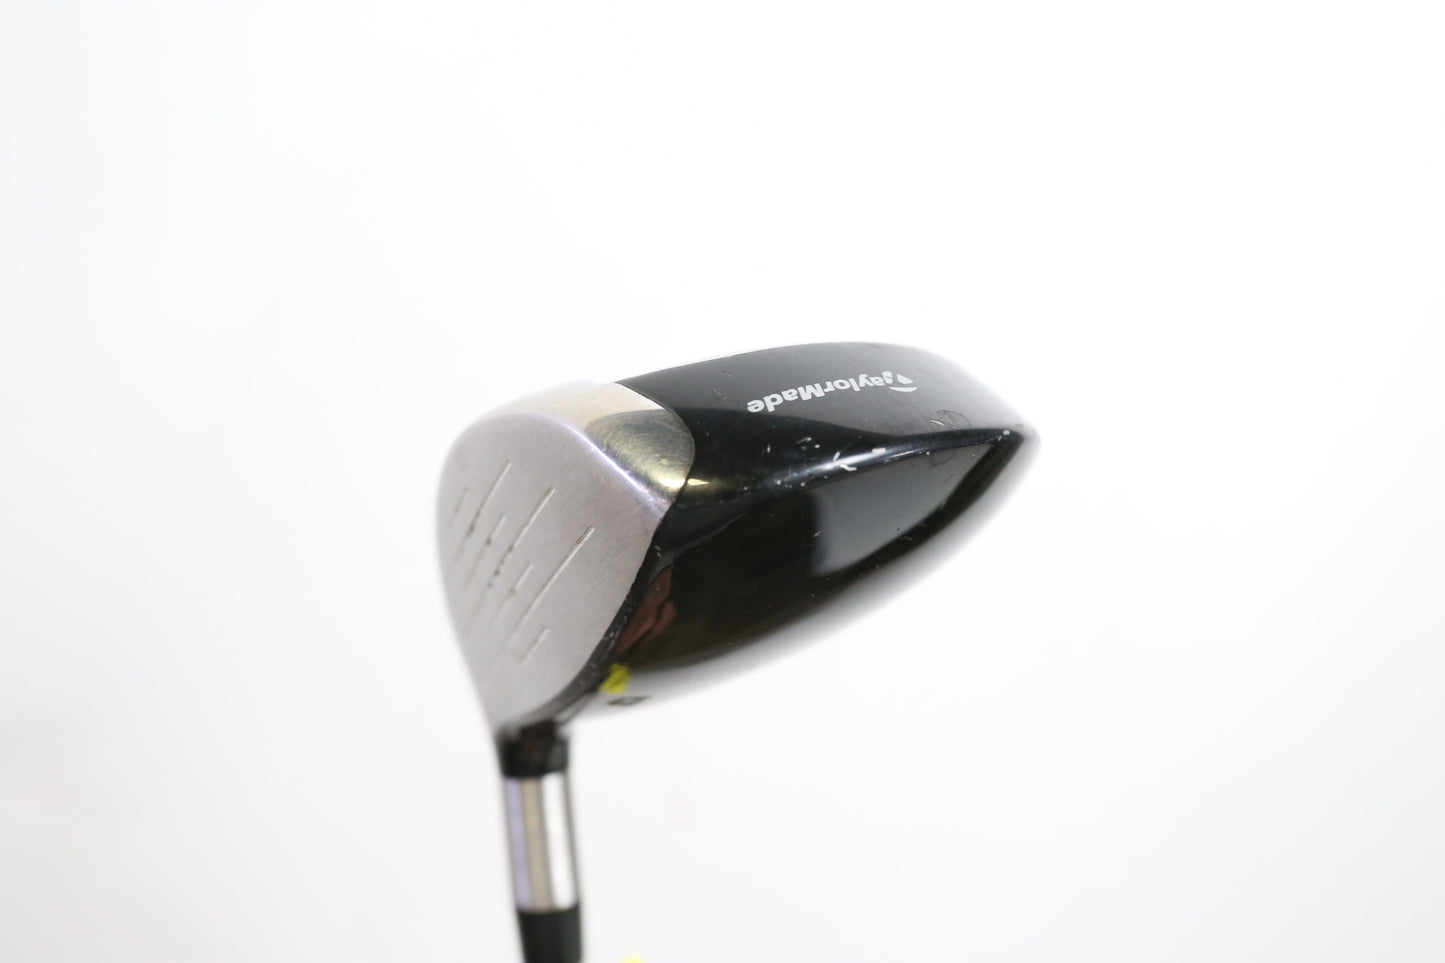 Used TaylorMade V Steel 3-Wood - Right-Handed - 15 Degrees - Ladies Flex-Next Round